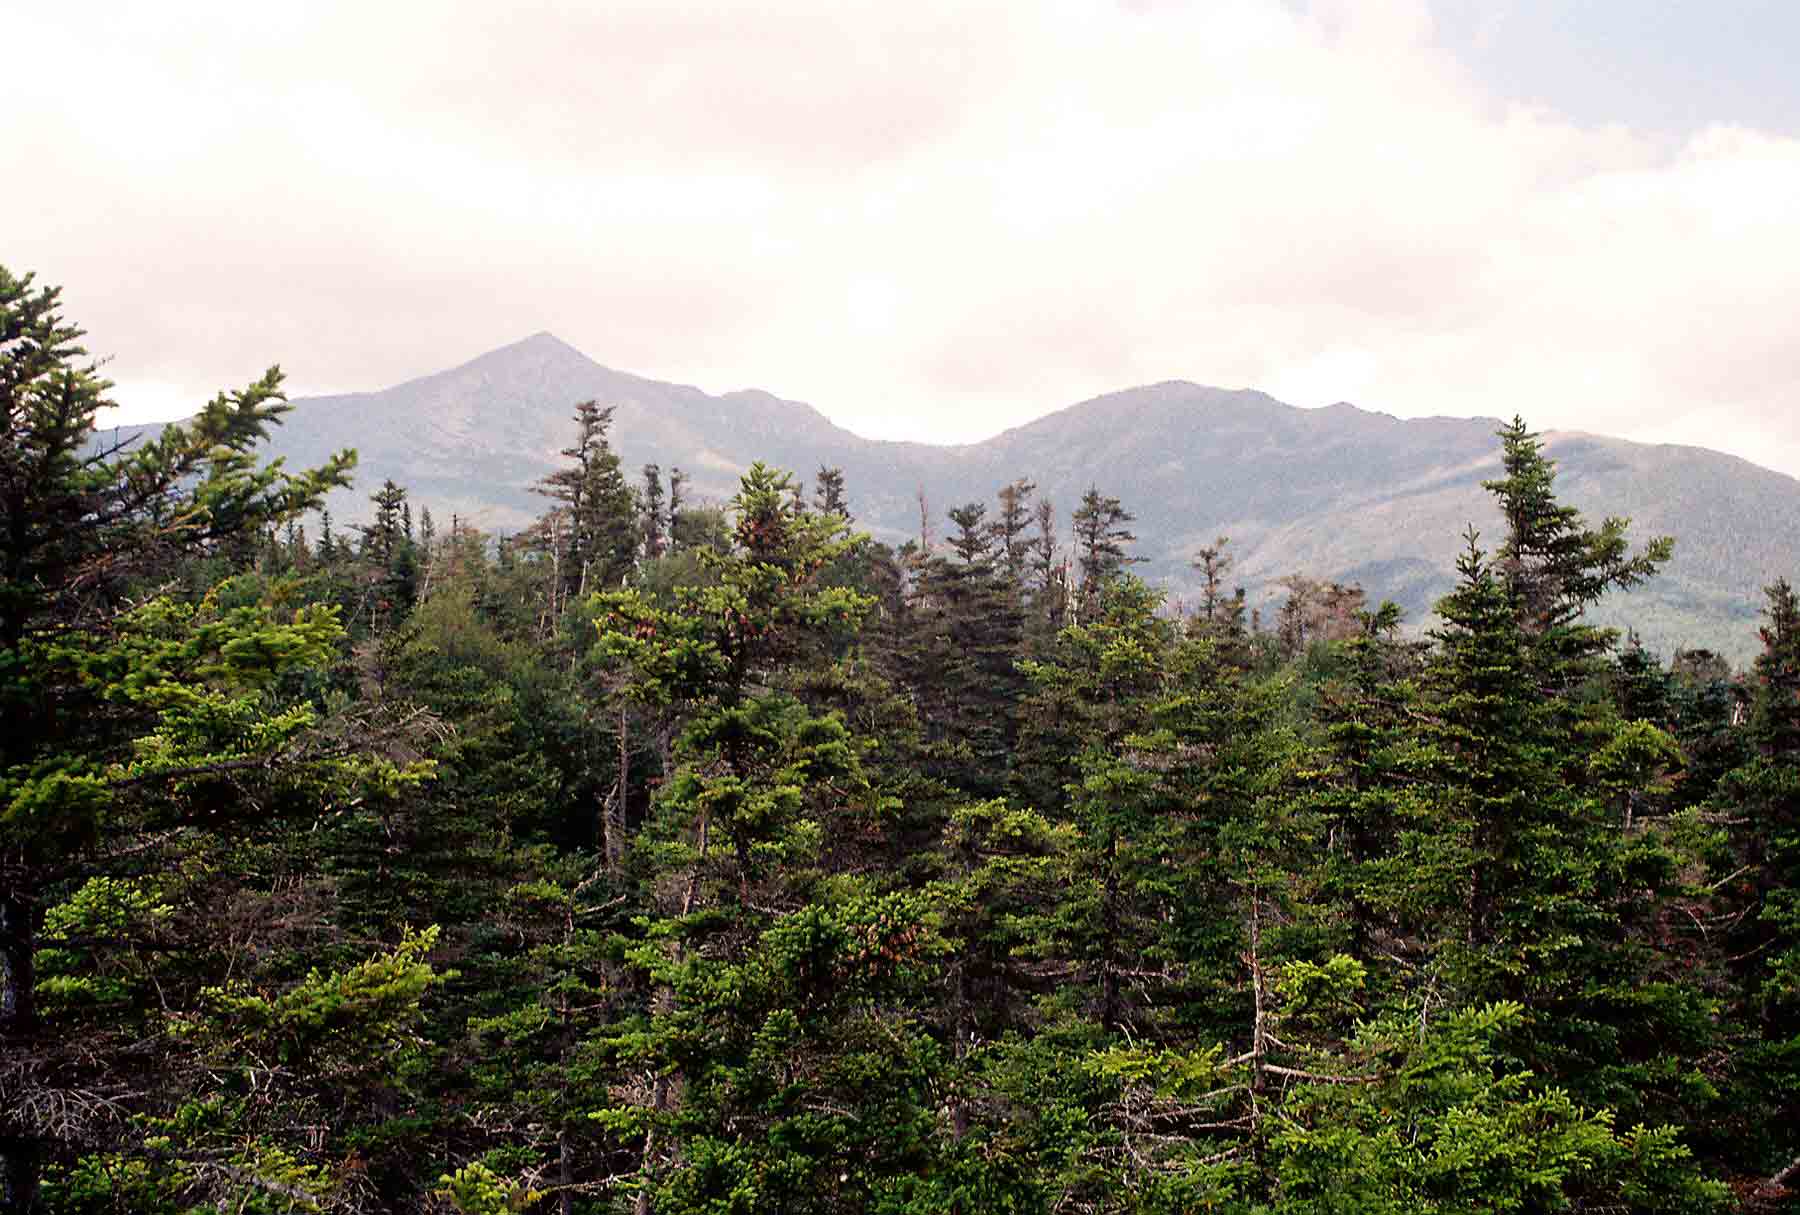 Coolidge Range from the AT east of River Road in Sherburne. Large Peak is Killington. Taken at approx. Mile 17.3.  Courtesy dlcul@conncoll.edu